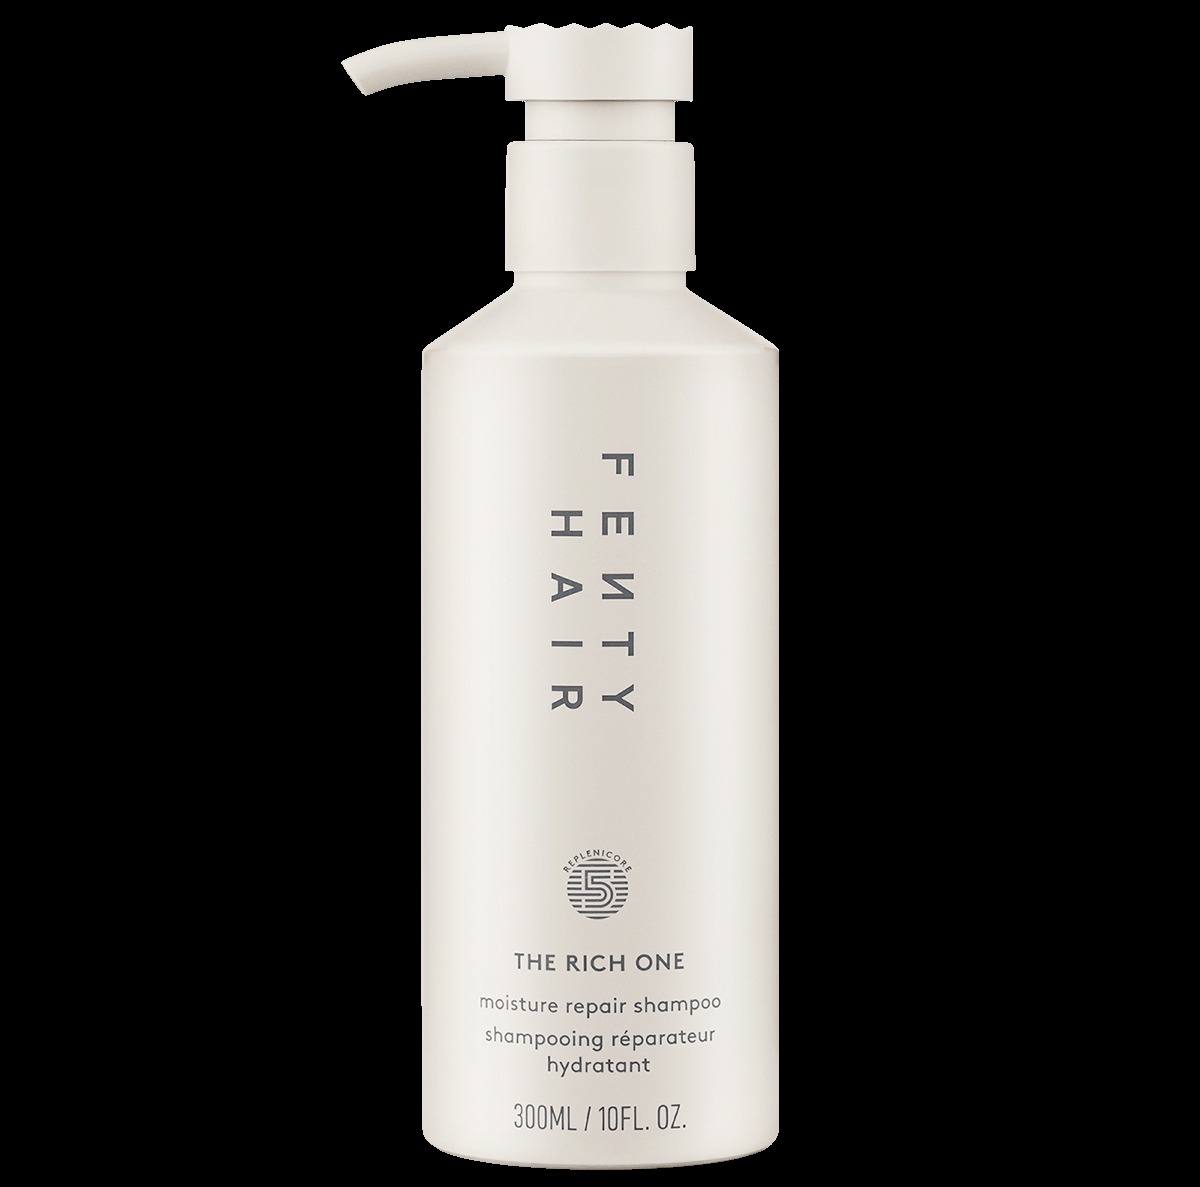 This hydrating shampoo is suitable for all hair types